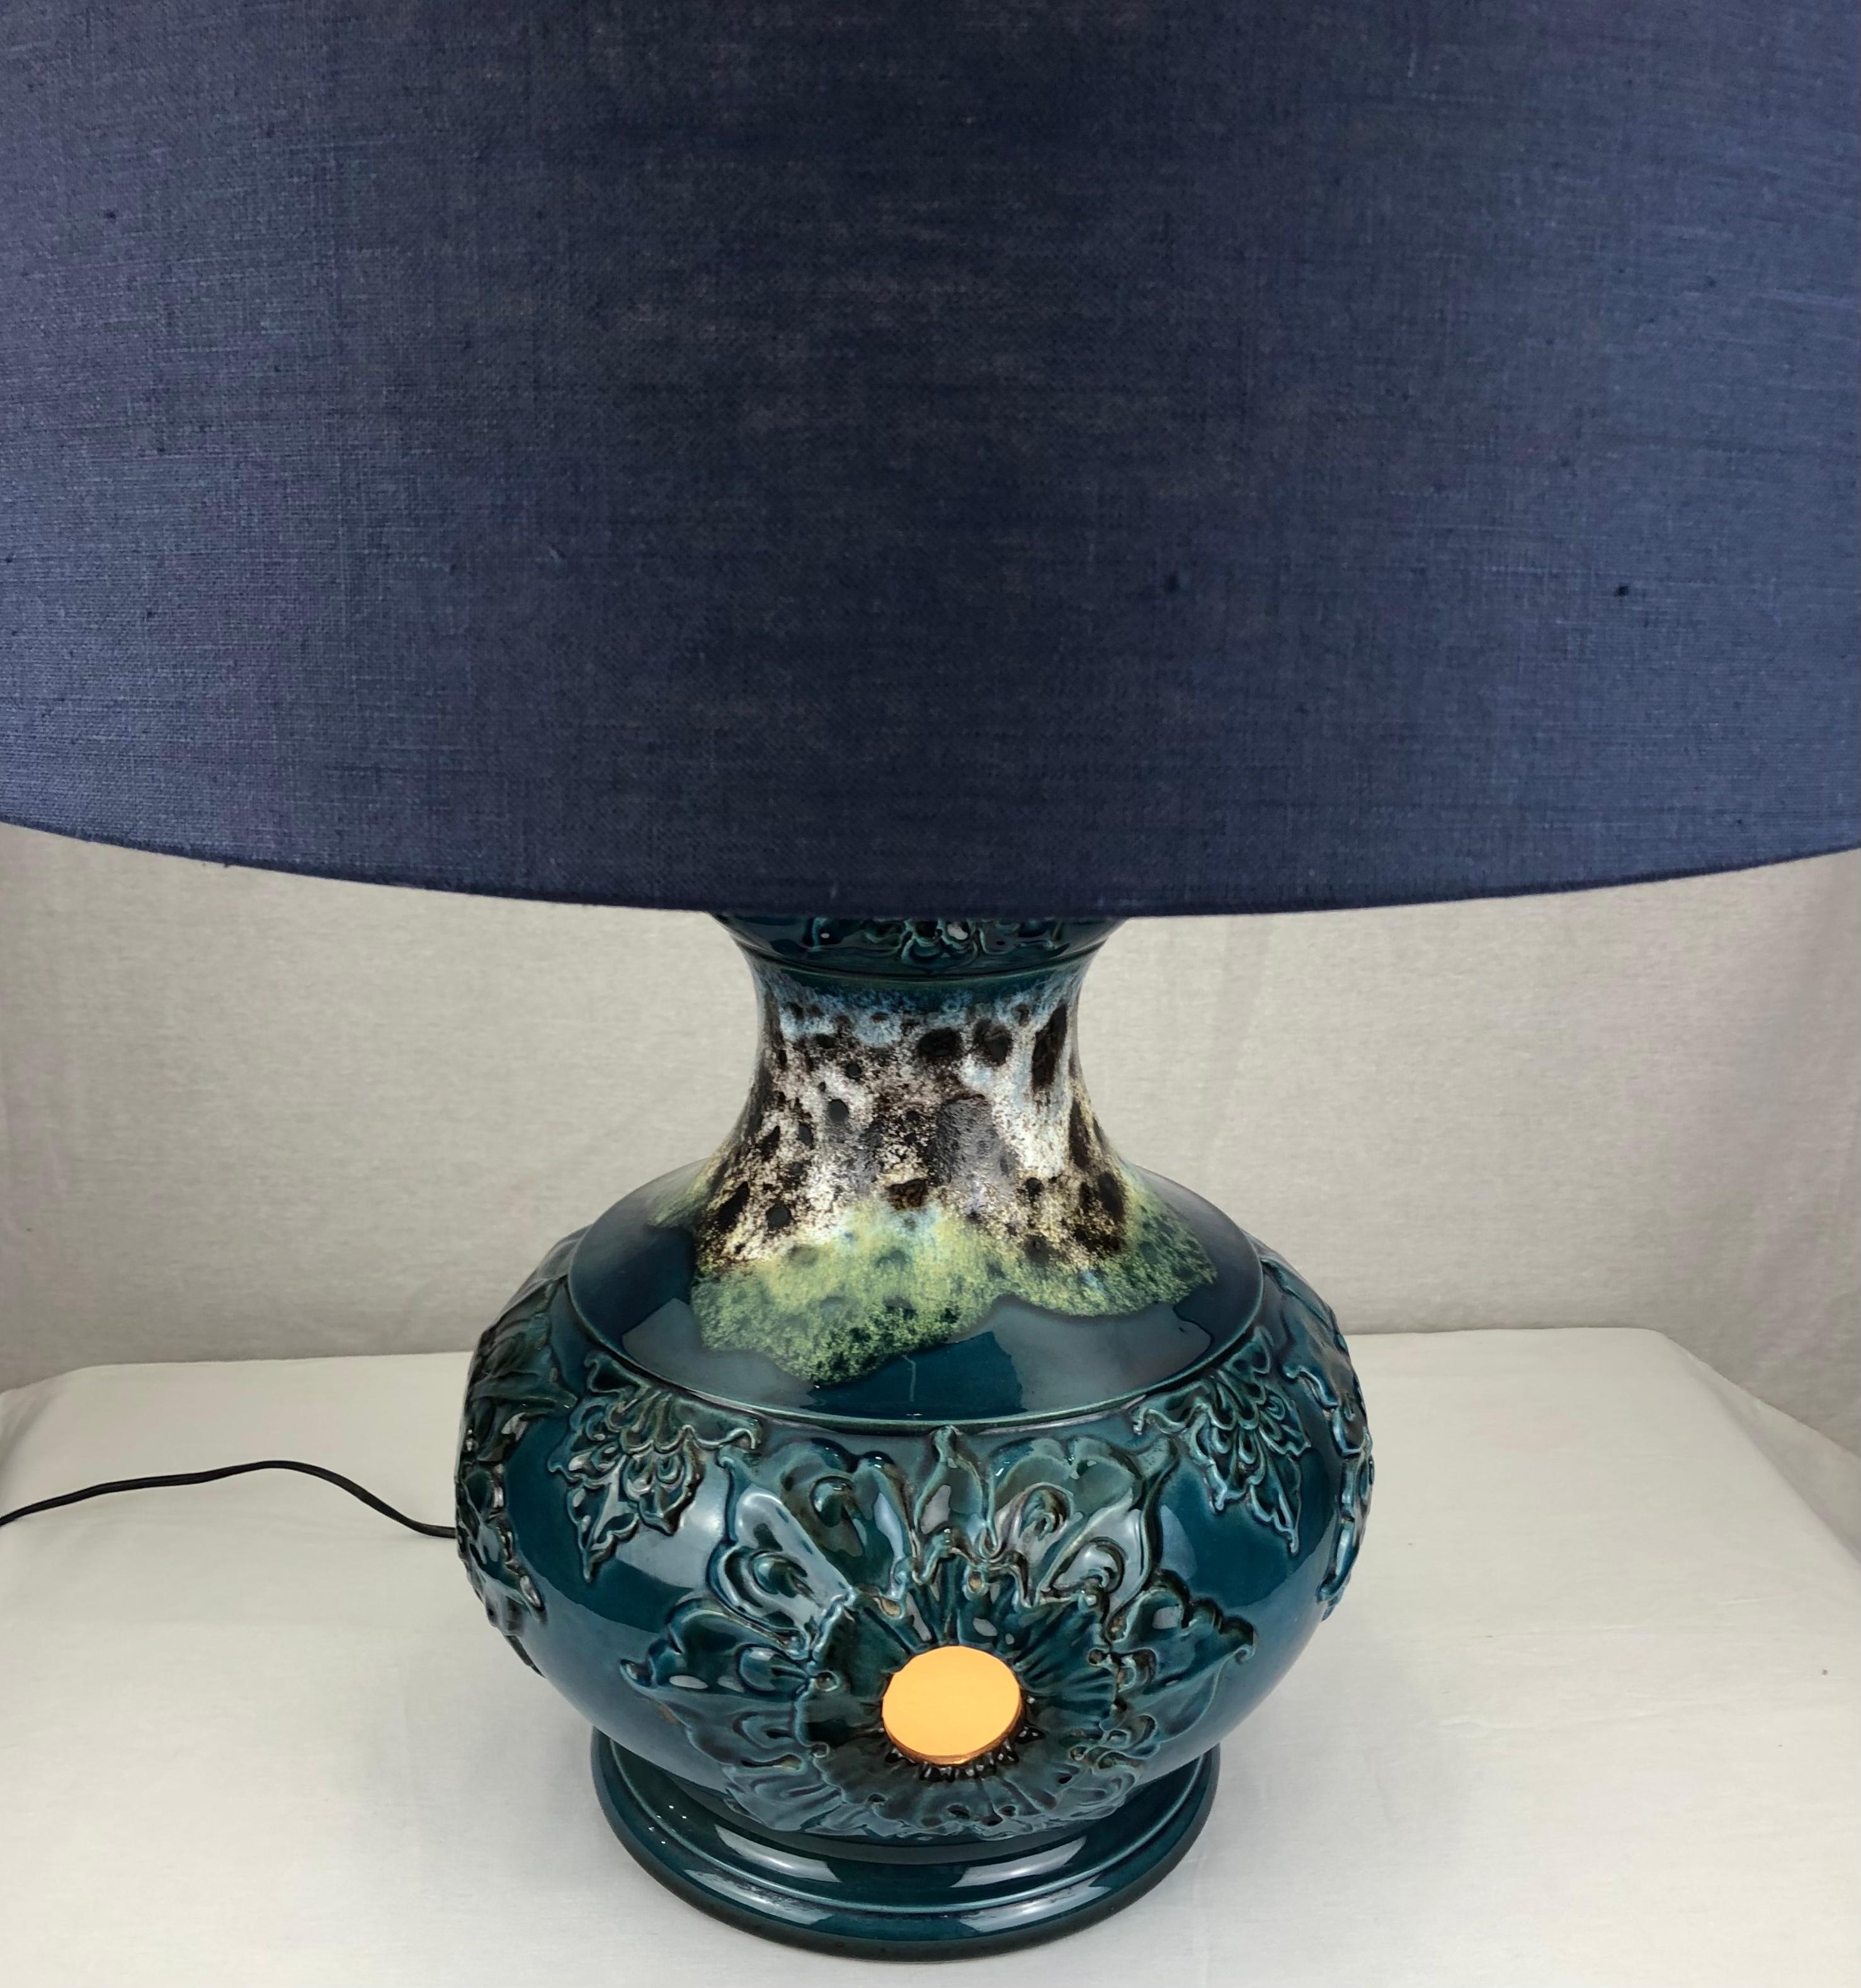 Very decorative table lamp in a stunning array of blue and beige colors. This Mid-Century Modern ceramic table lamp has notable sculptural work and would look great in any setting.

In perfect vintage condition. 
Wired for use in France, sold 